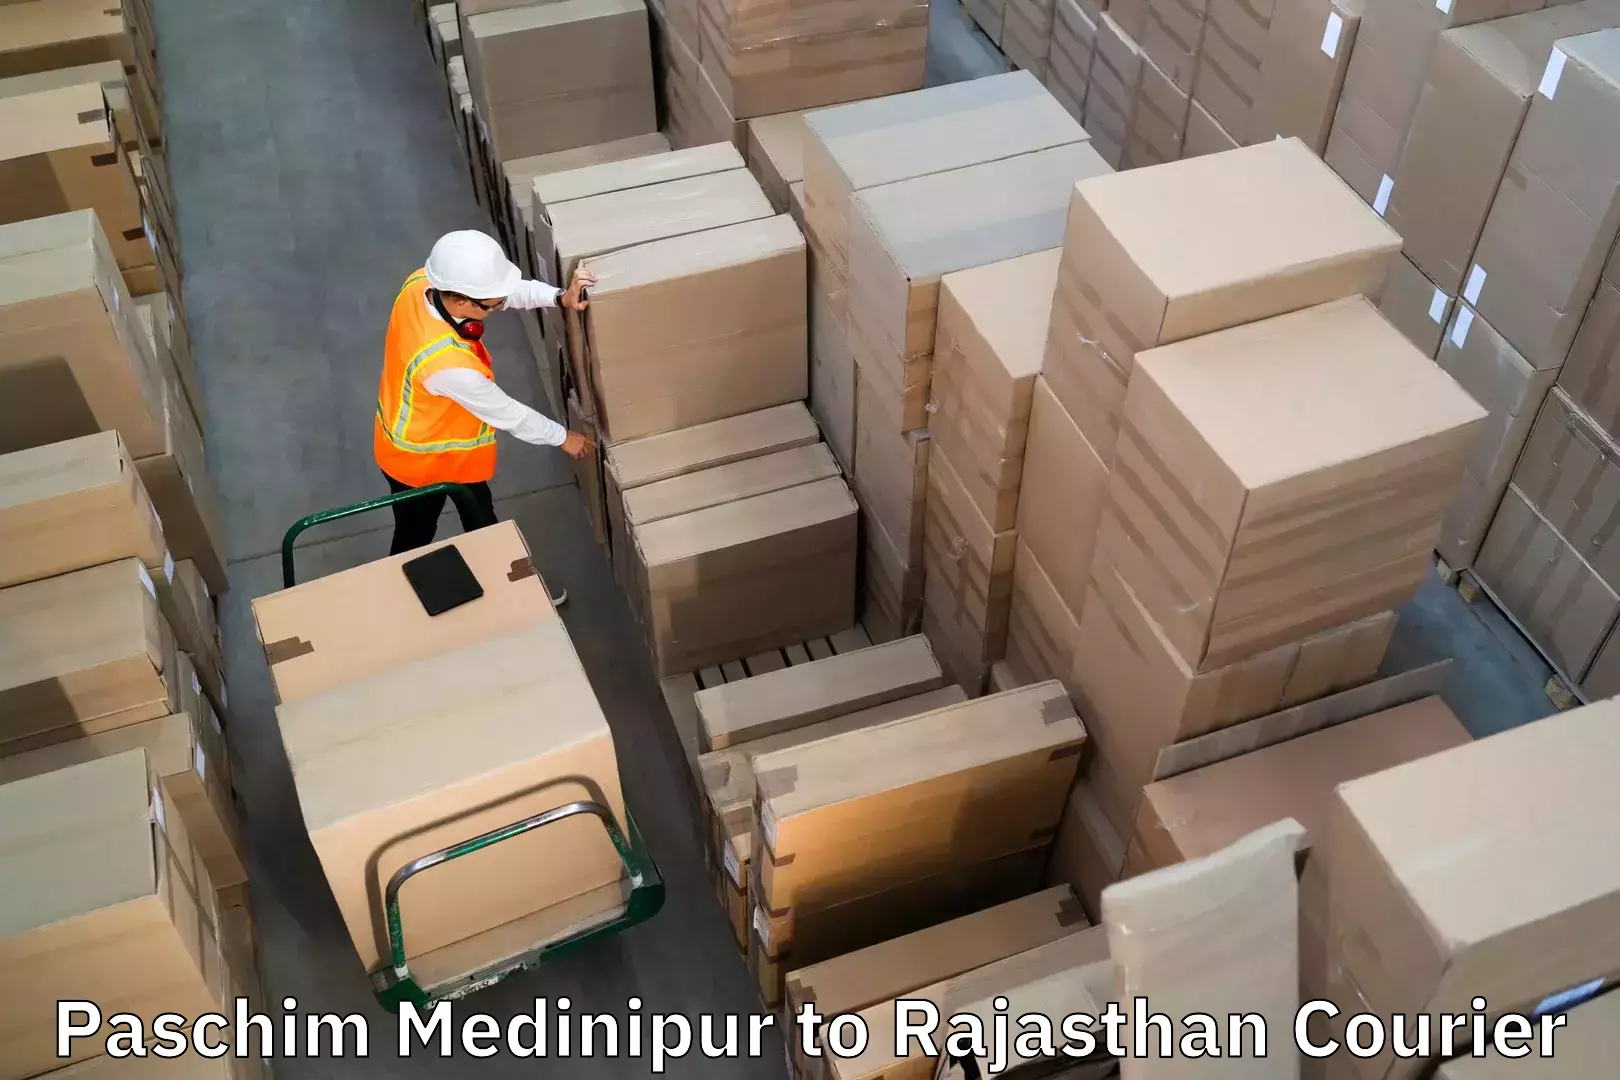 Luggage shipping specialists Paschim Medinipur to Sikar